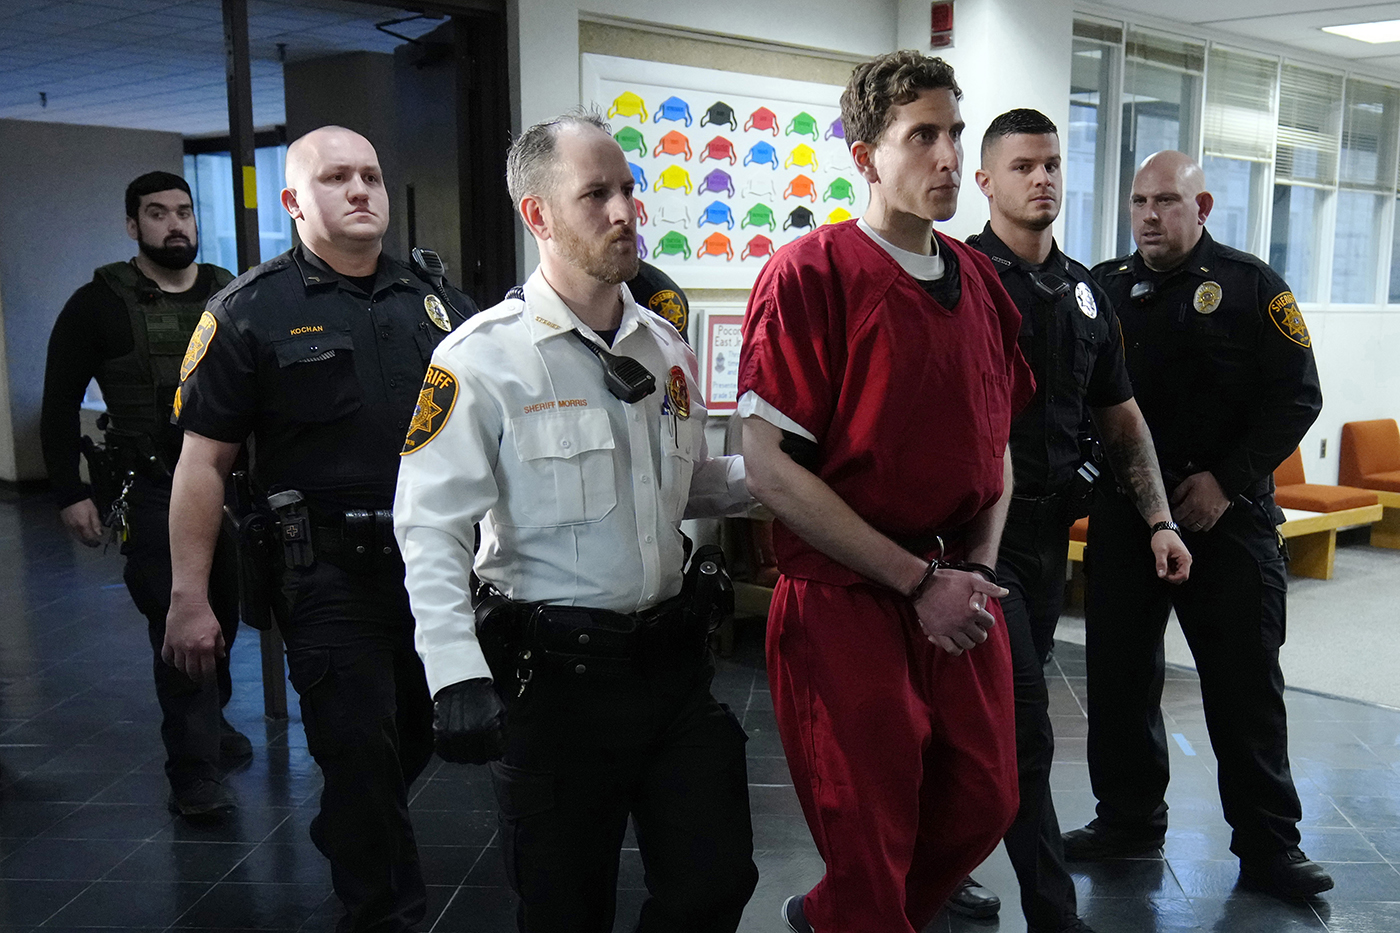 bryan kohberger being escorted from an extradition hearing by police officers